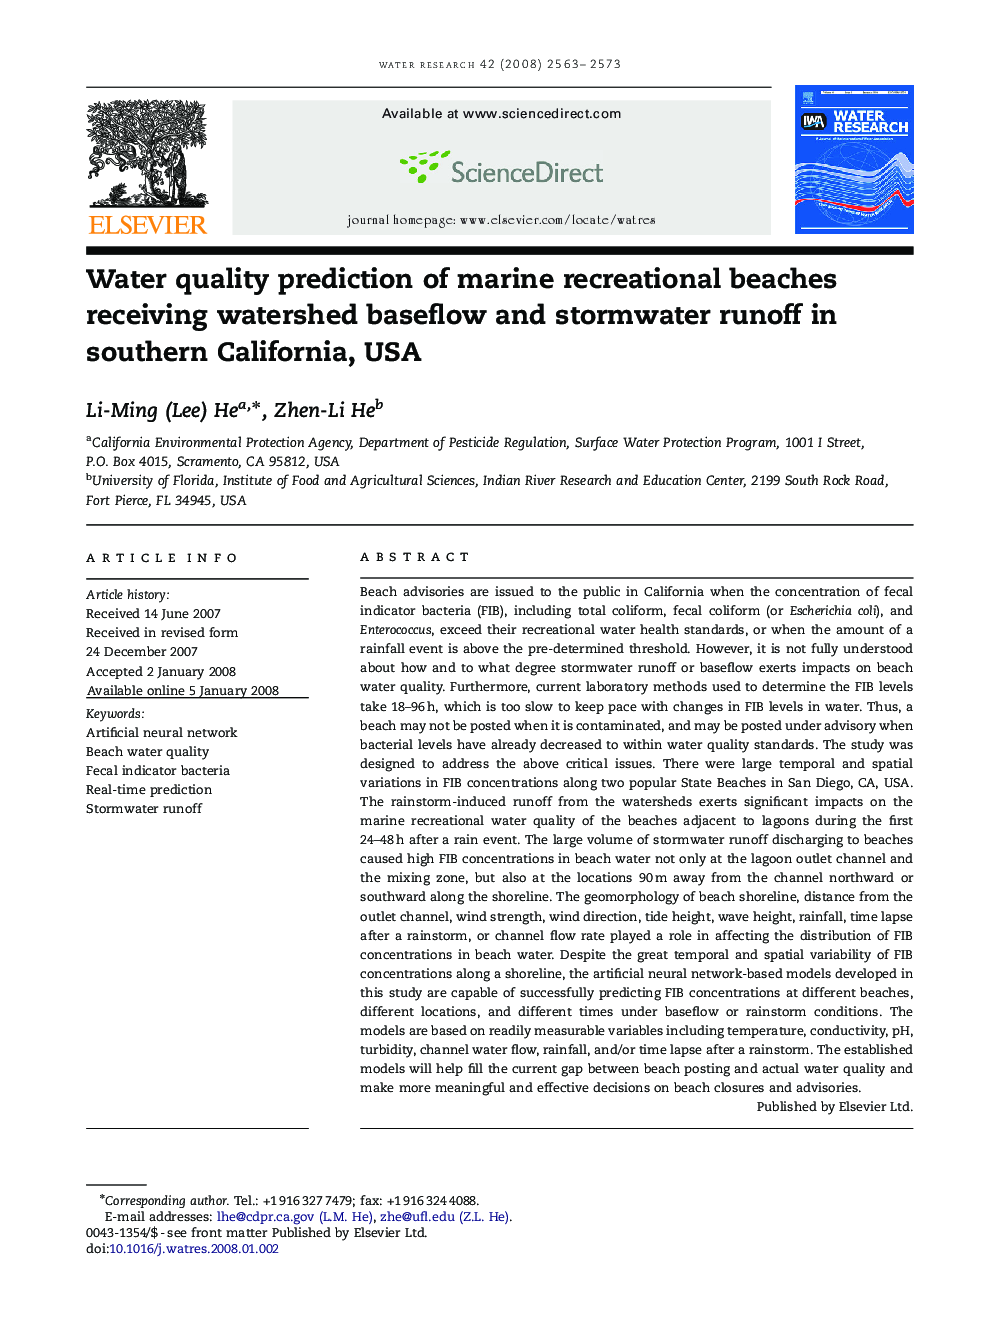 Water quality prediction of marine recreational beaches receiving watershed baseflow and stormwater runoff in southern California, USA